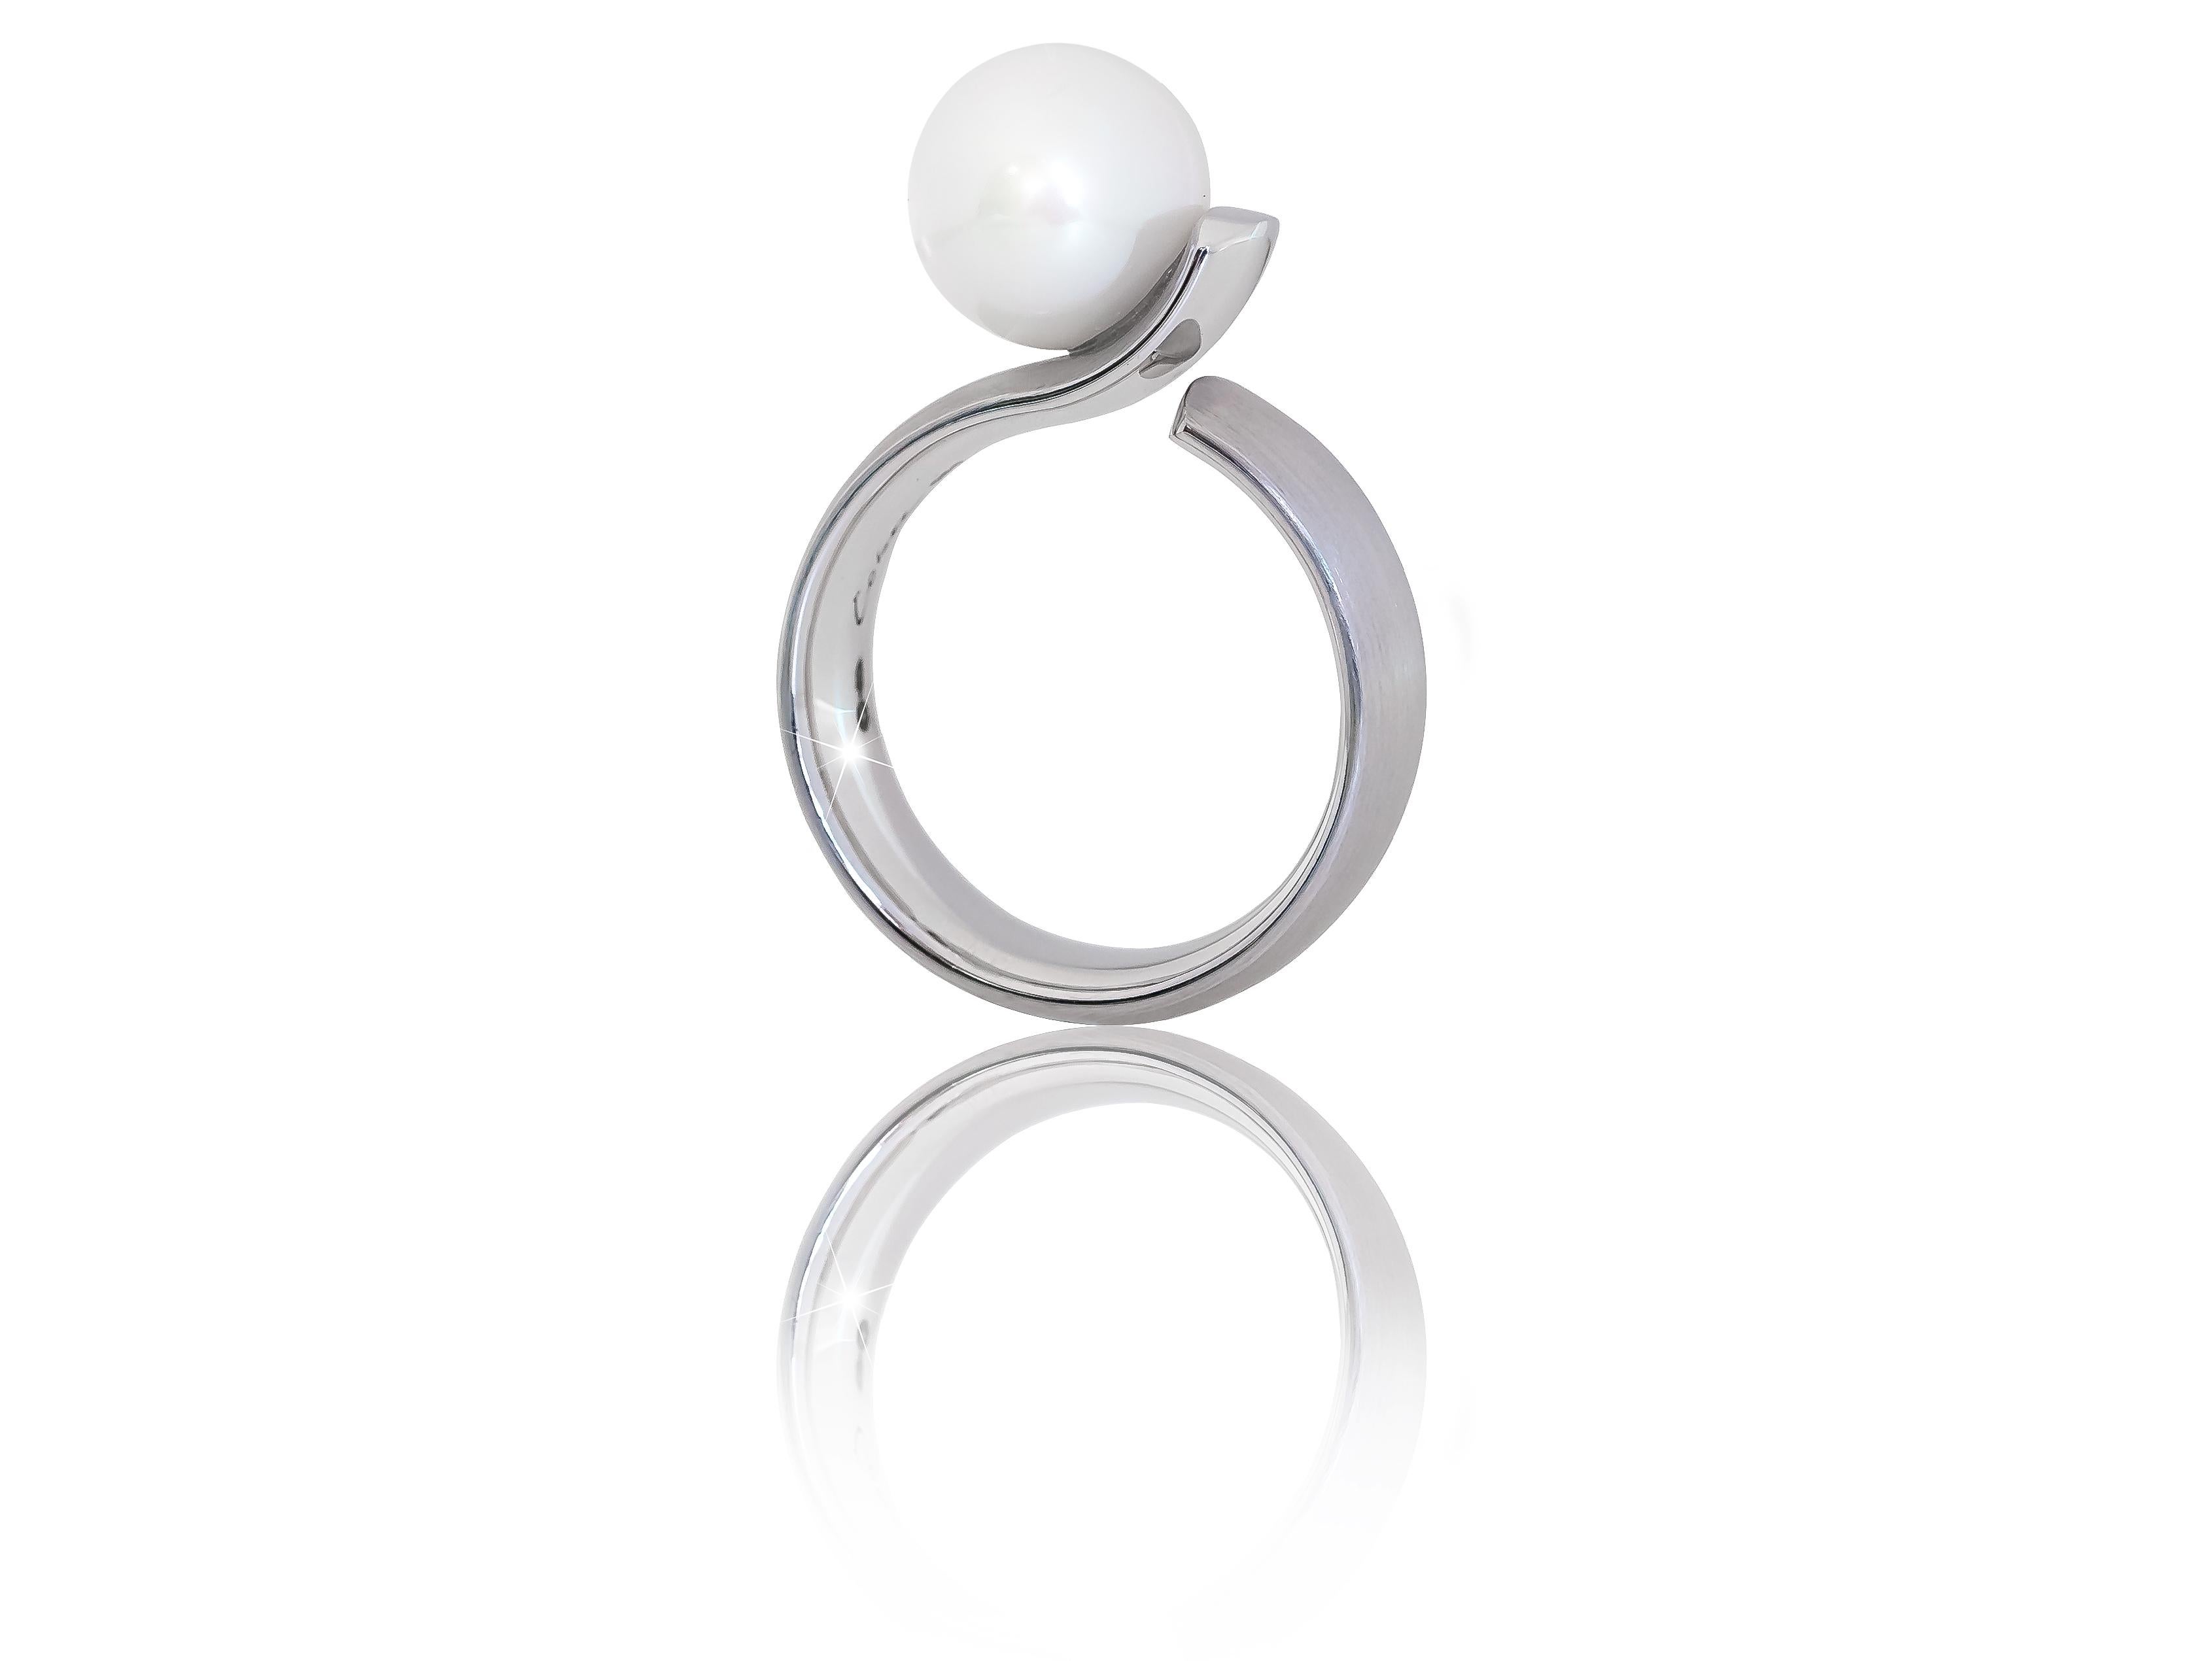 We invite you to see more of our collection from Cober Jewellery at 1stDibs!
You can type Cober Jewellery in the search bar to view more of our pieces of jewellery at our webshop.

Cober Jewellery “Tickling Curl” White gold with freshwater Pearl 0f